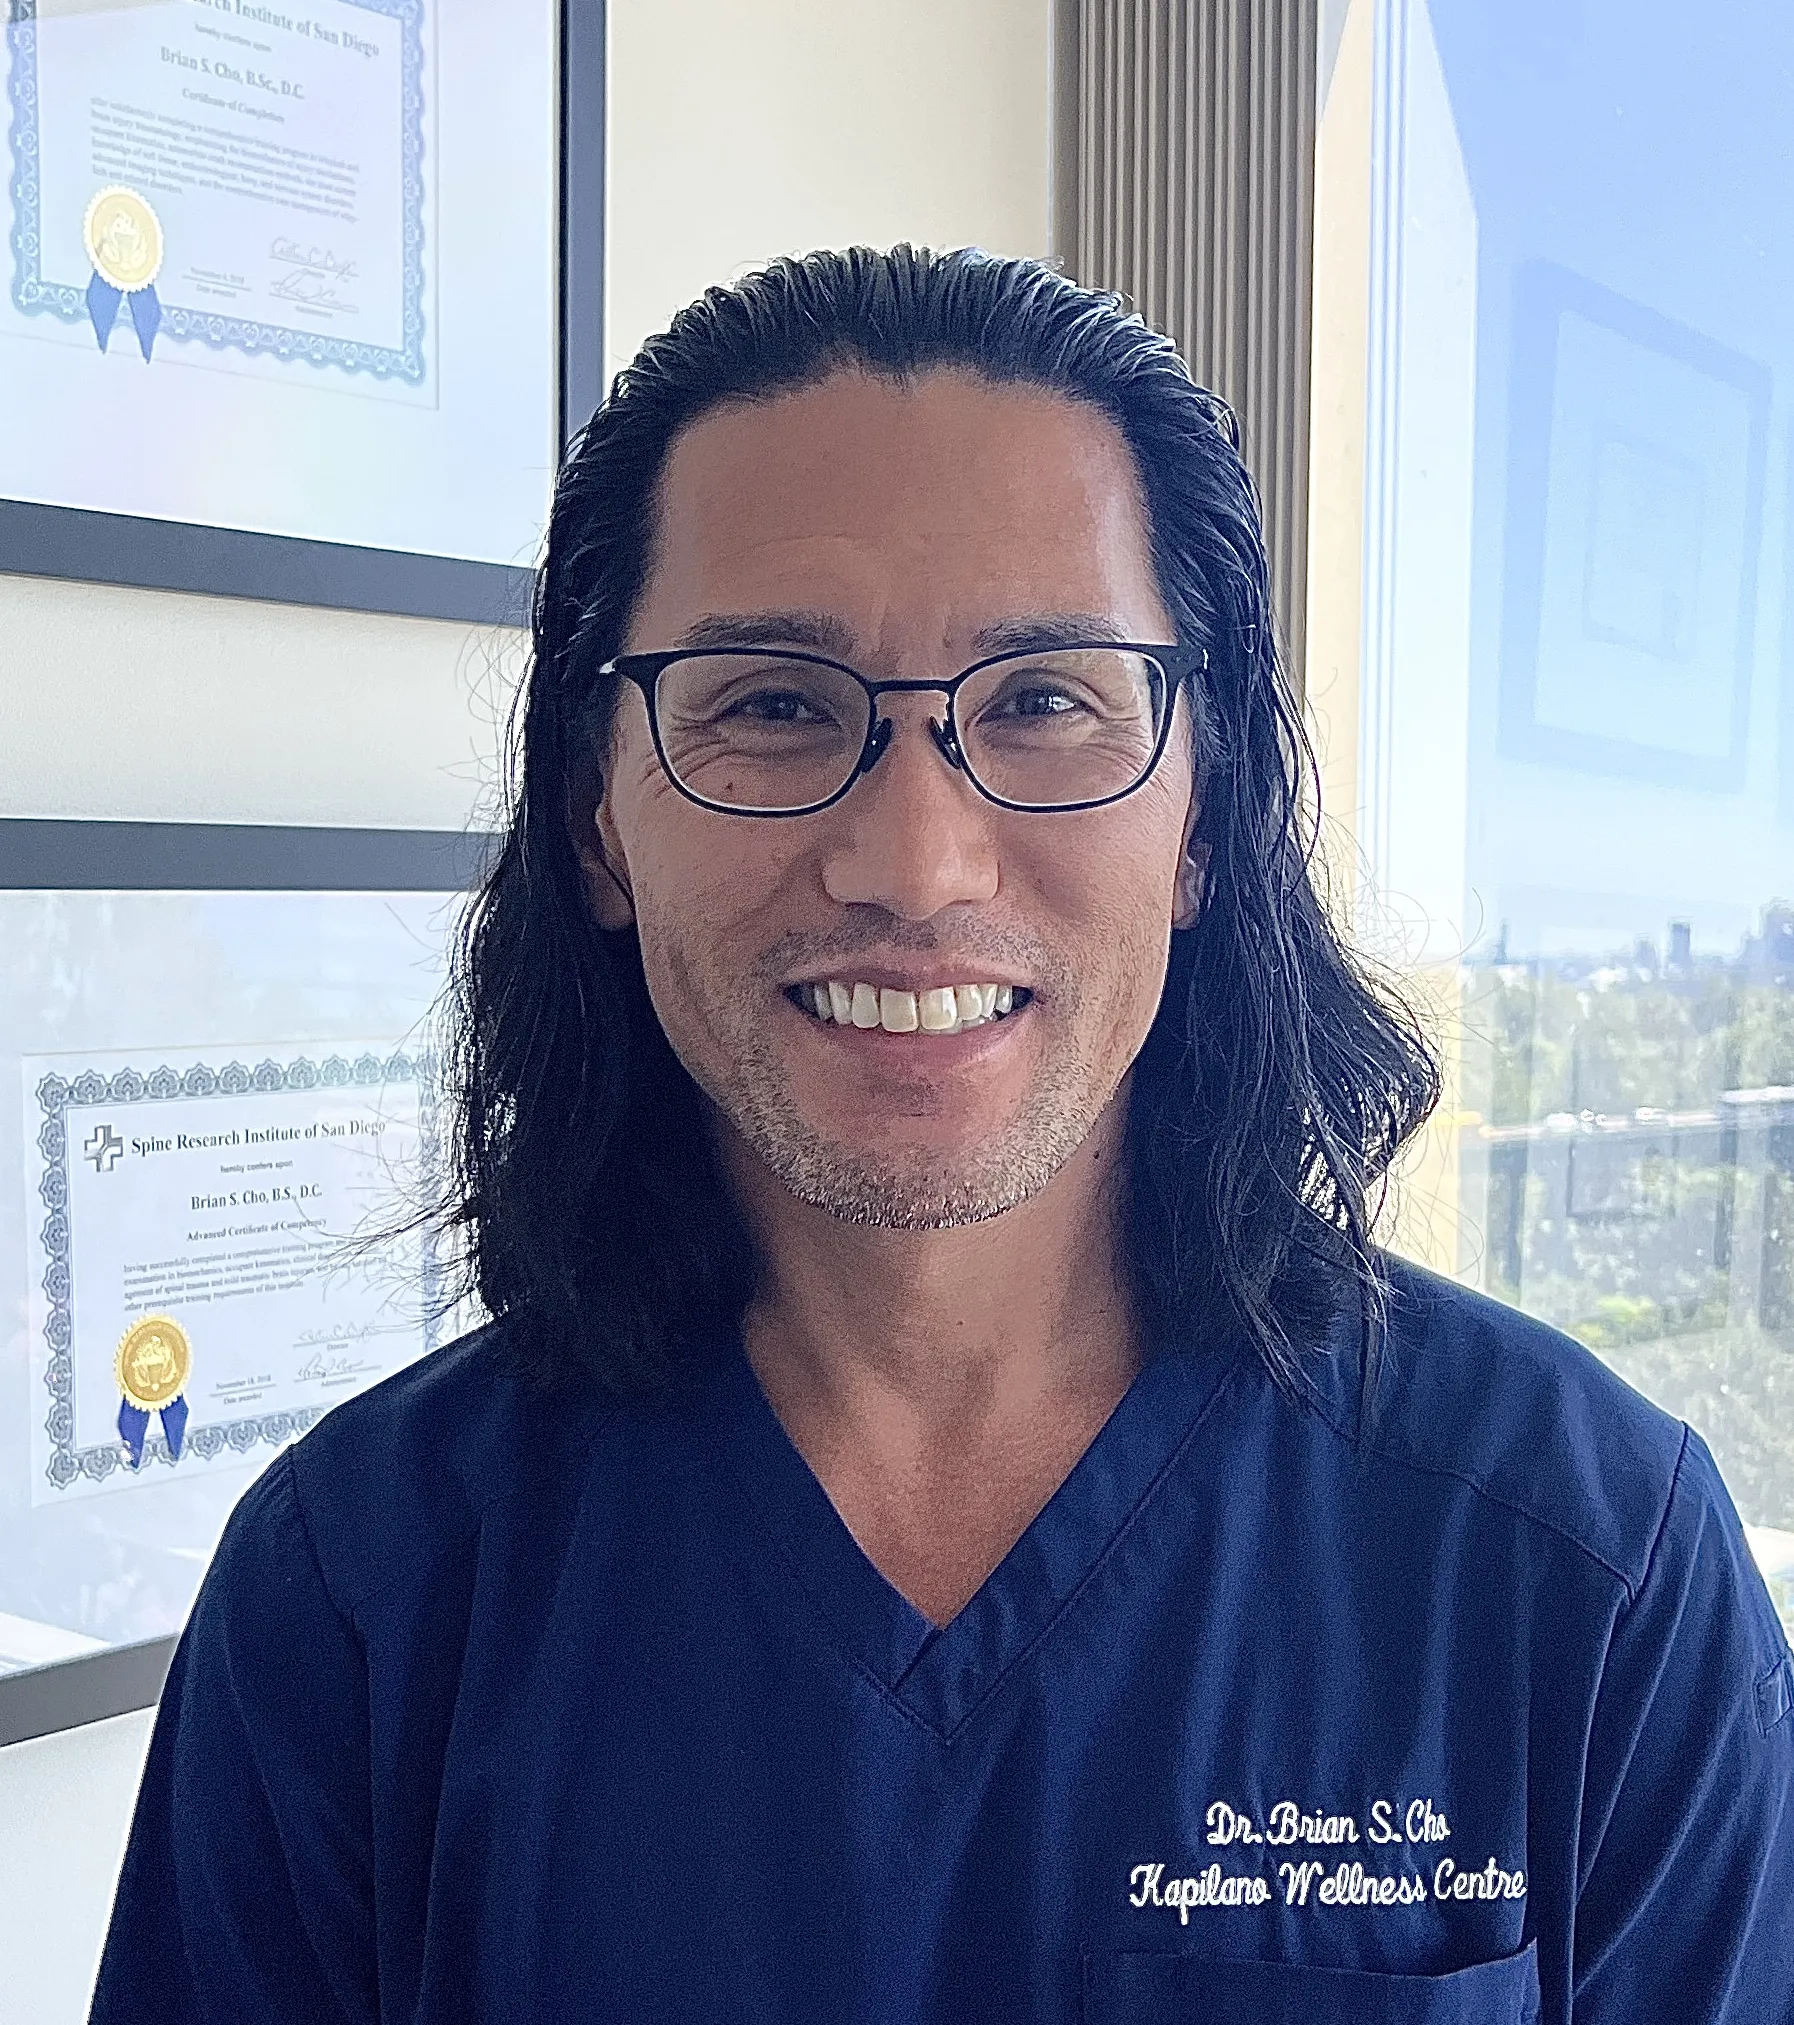 Chiropractor Dr. Brian Cho, Best Chiropractor in Vancouver